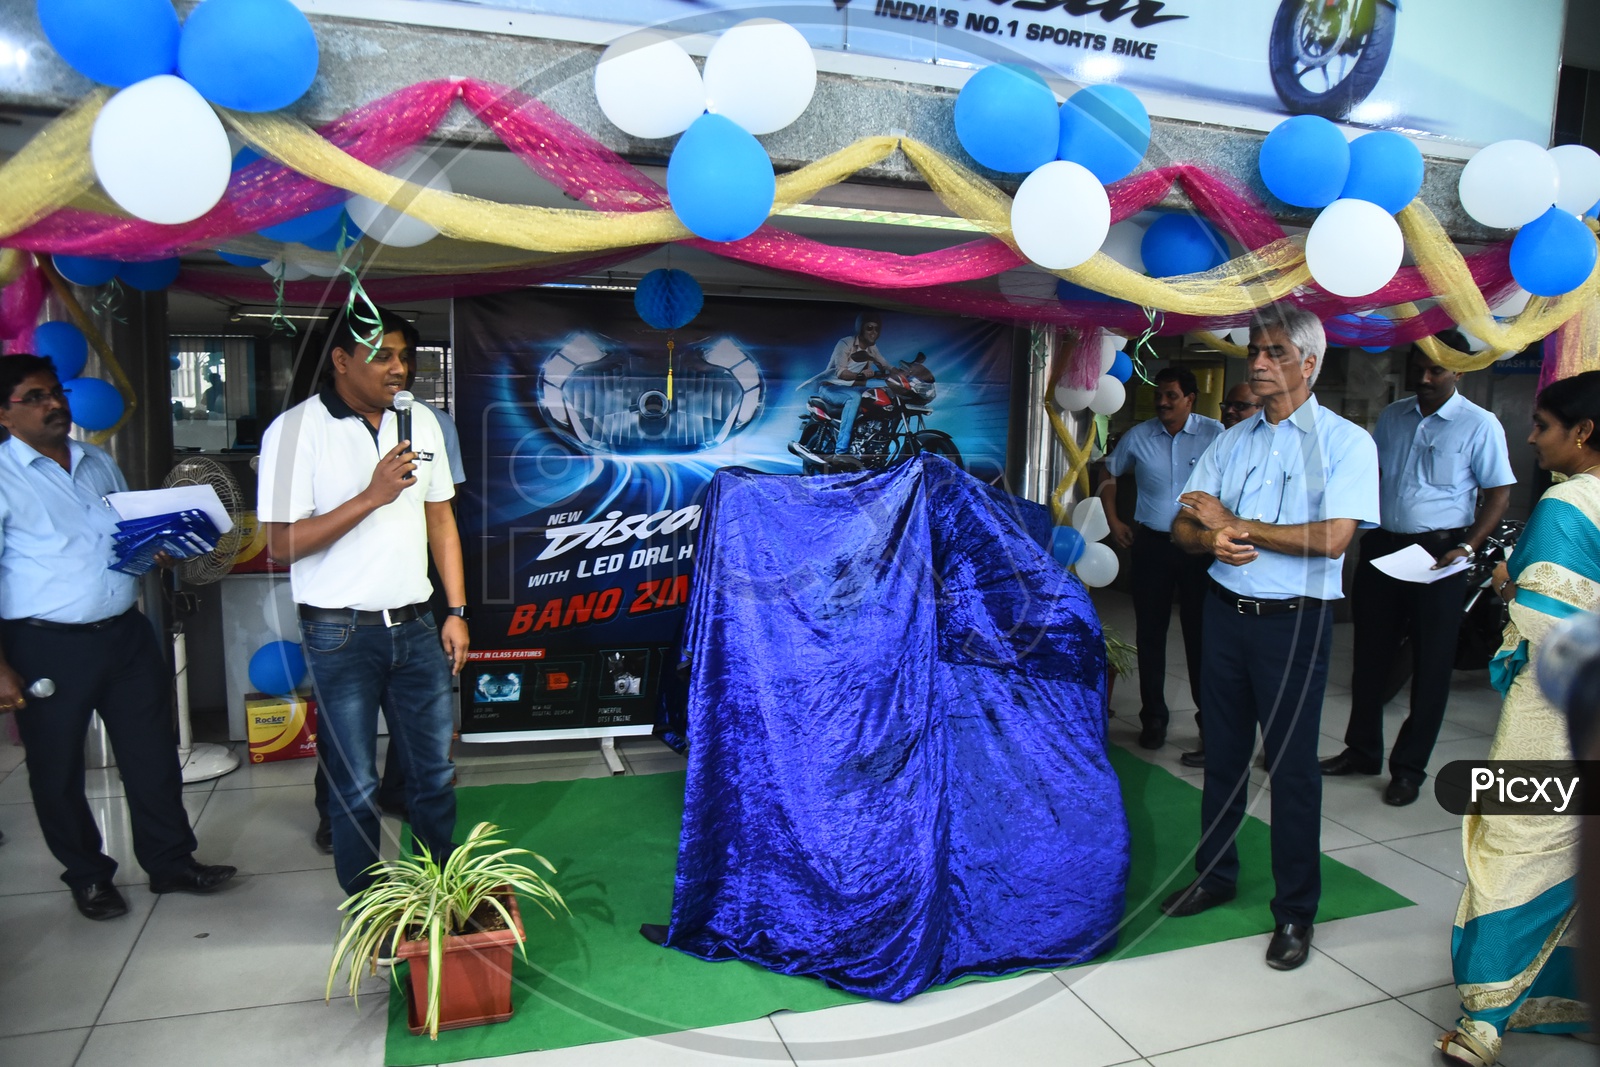 Staff launching the Bajaj Discover motrocycle